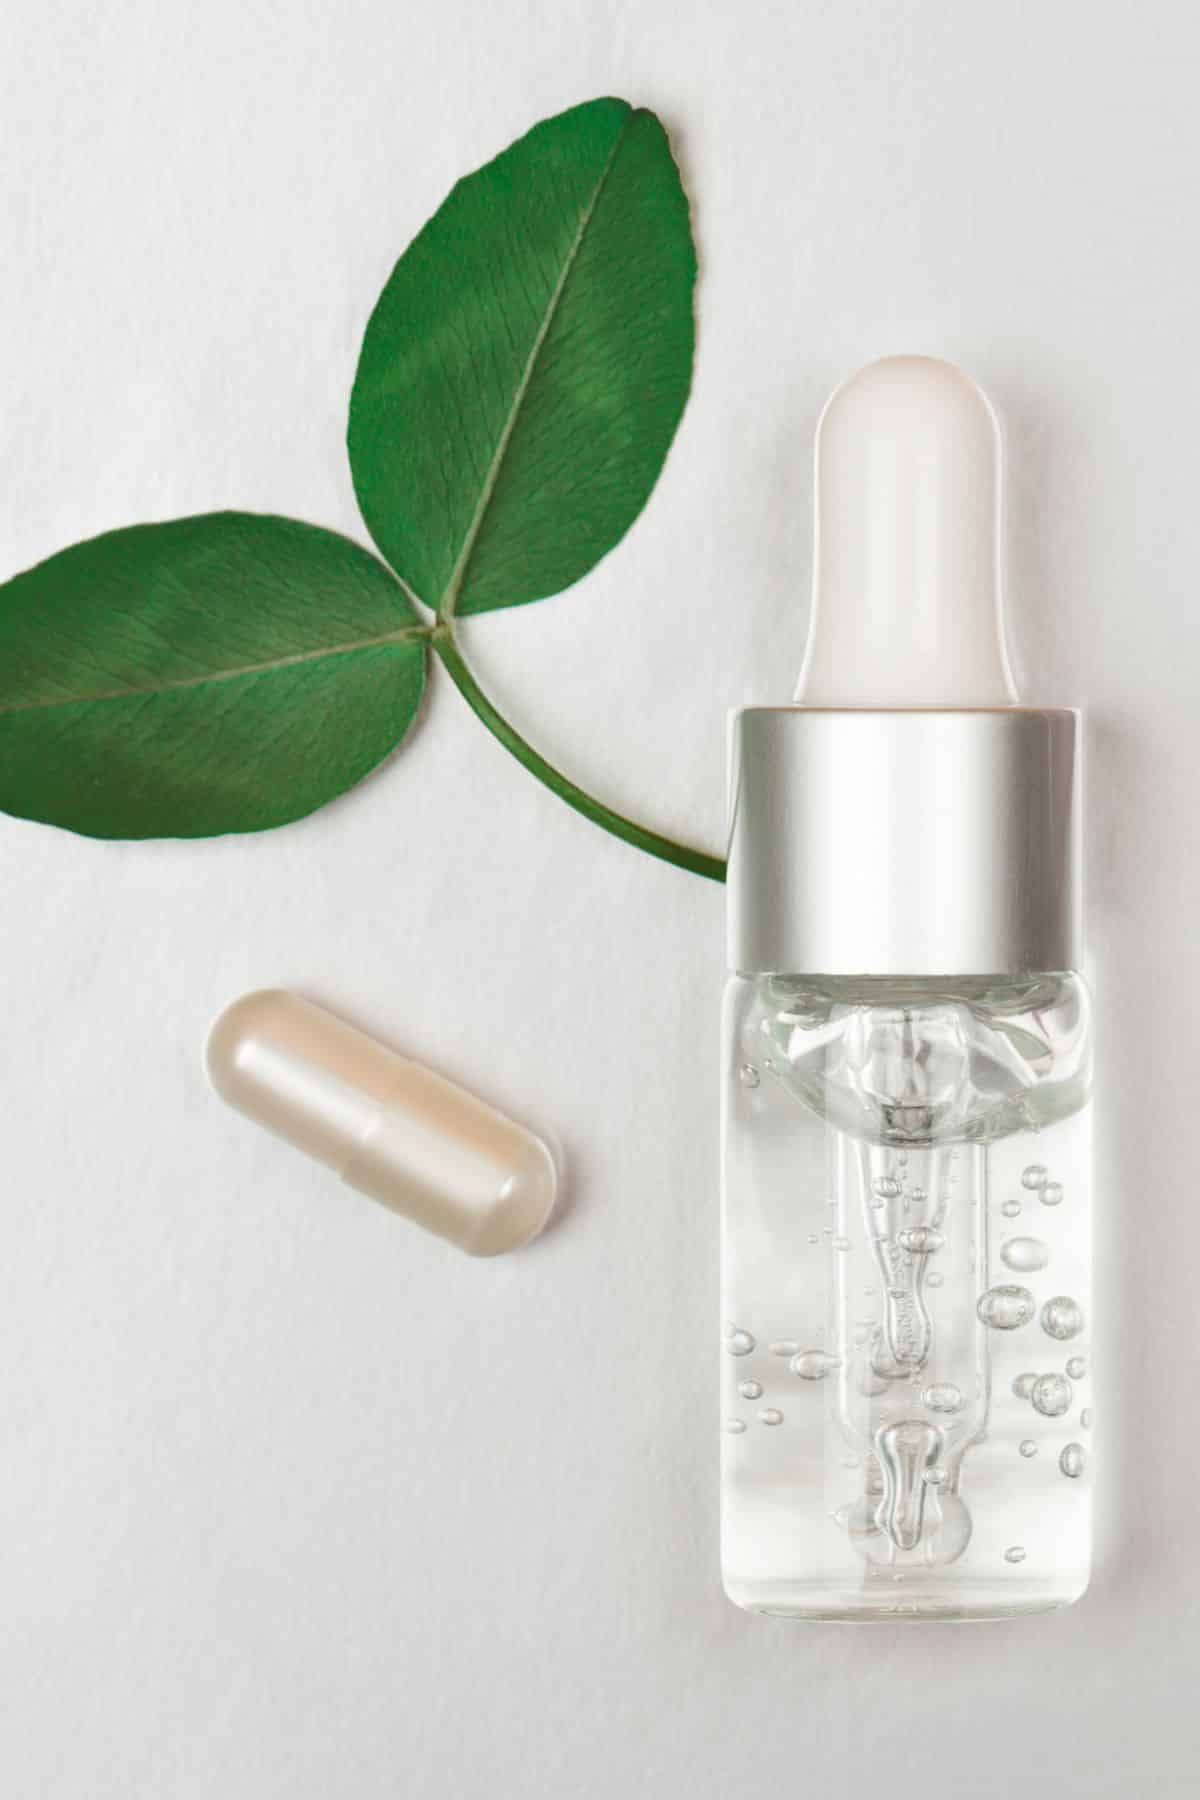 a bottle of hyaluronic acid next to a supplement and a green leaf.